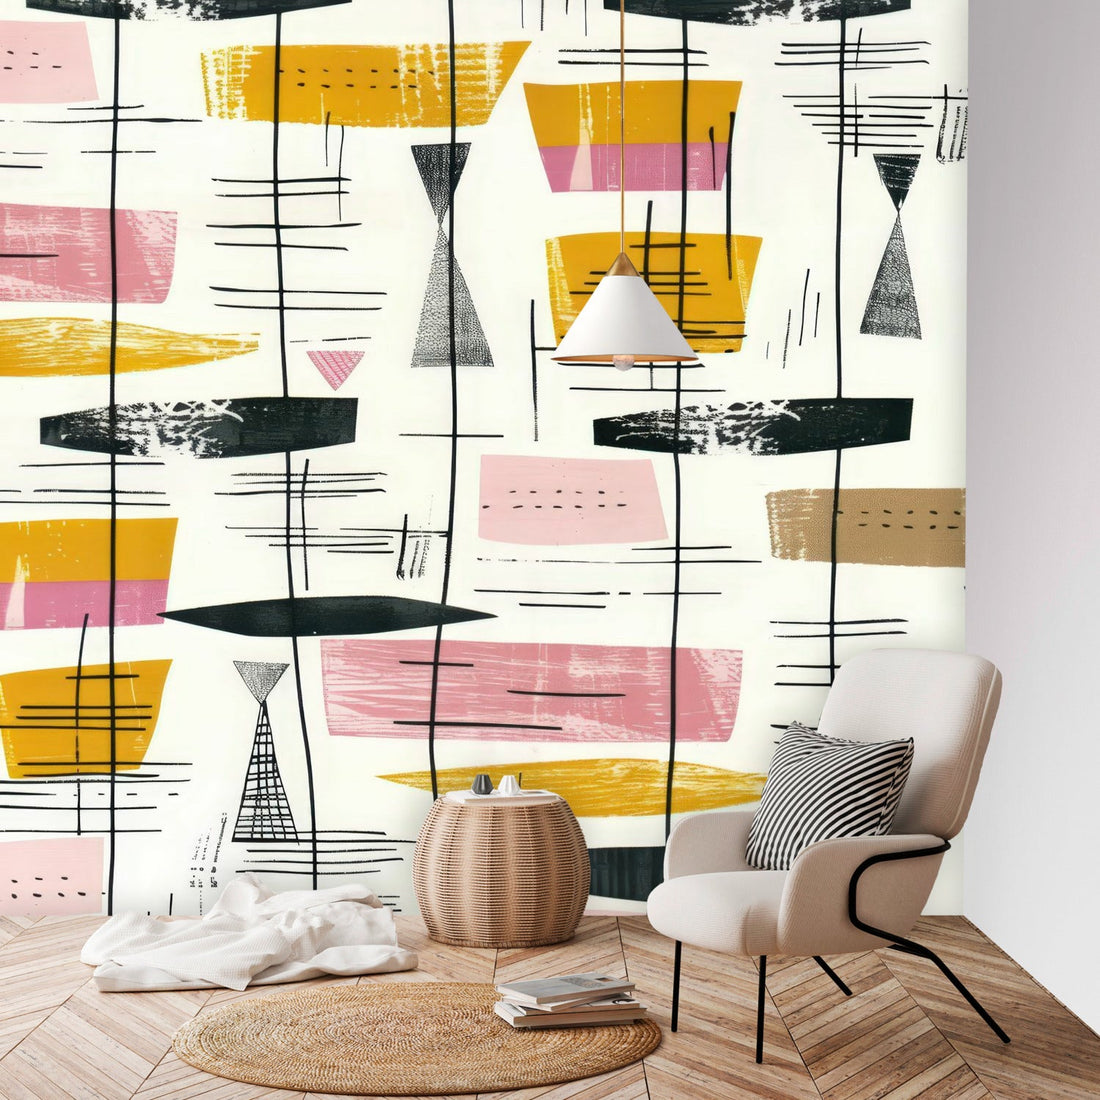 Kate McEnroe New York Retro Abstract Wall Mural, Mid Century Modern Peel And Stick Design, 1950s Style Home Decor, Geometric Mural Panels, Vintage Accent Wall ArtWall Mural118572